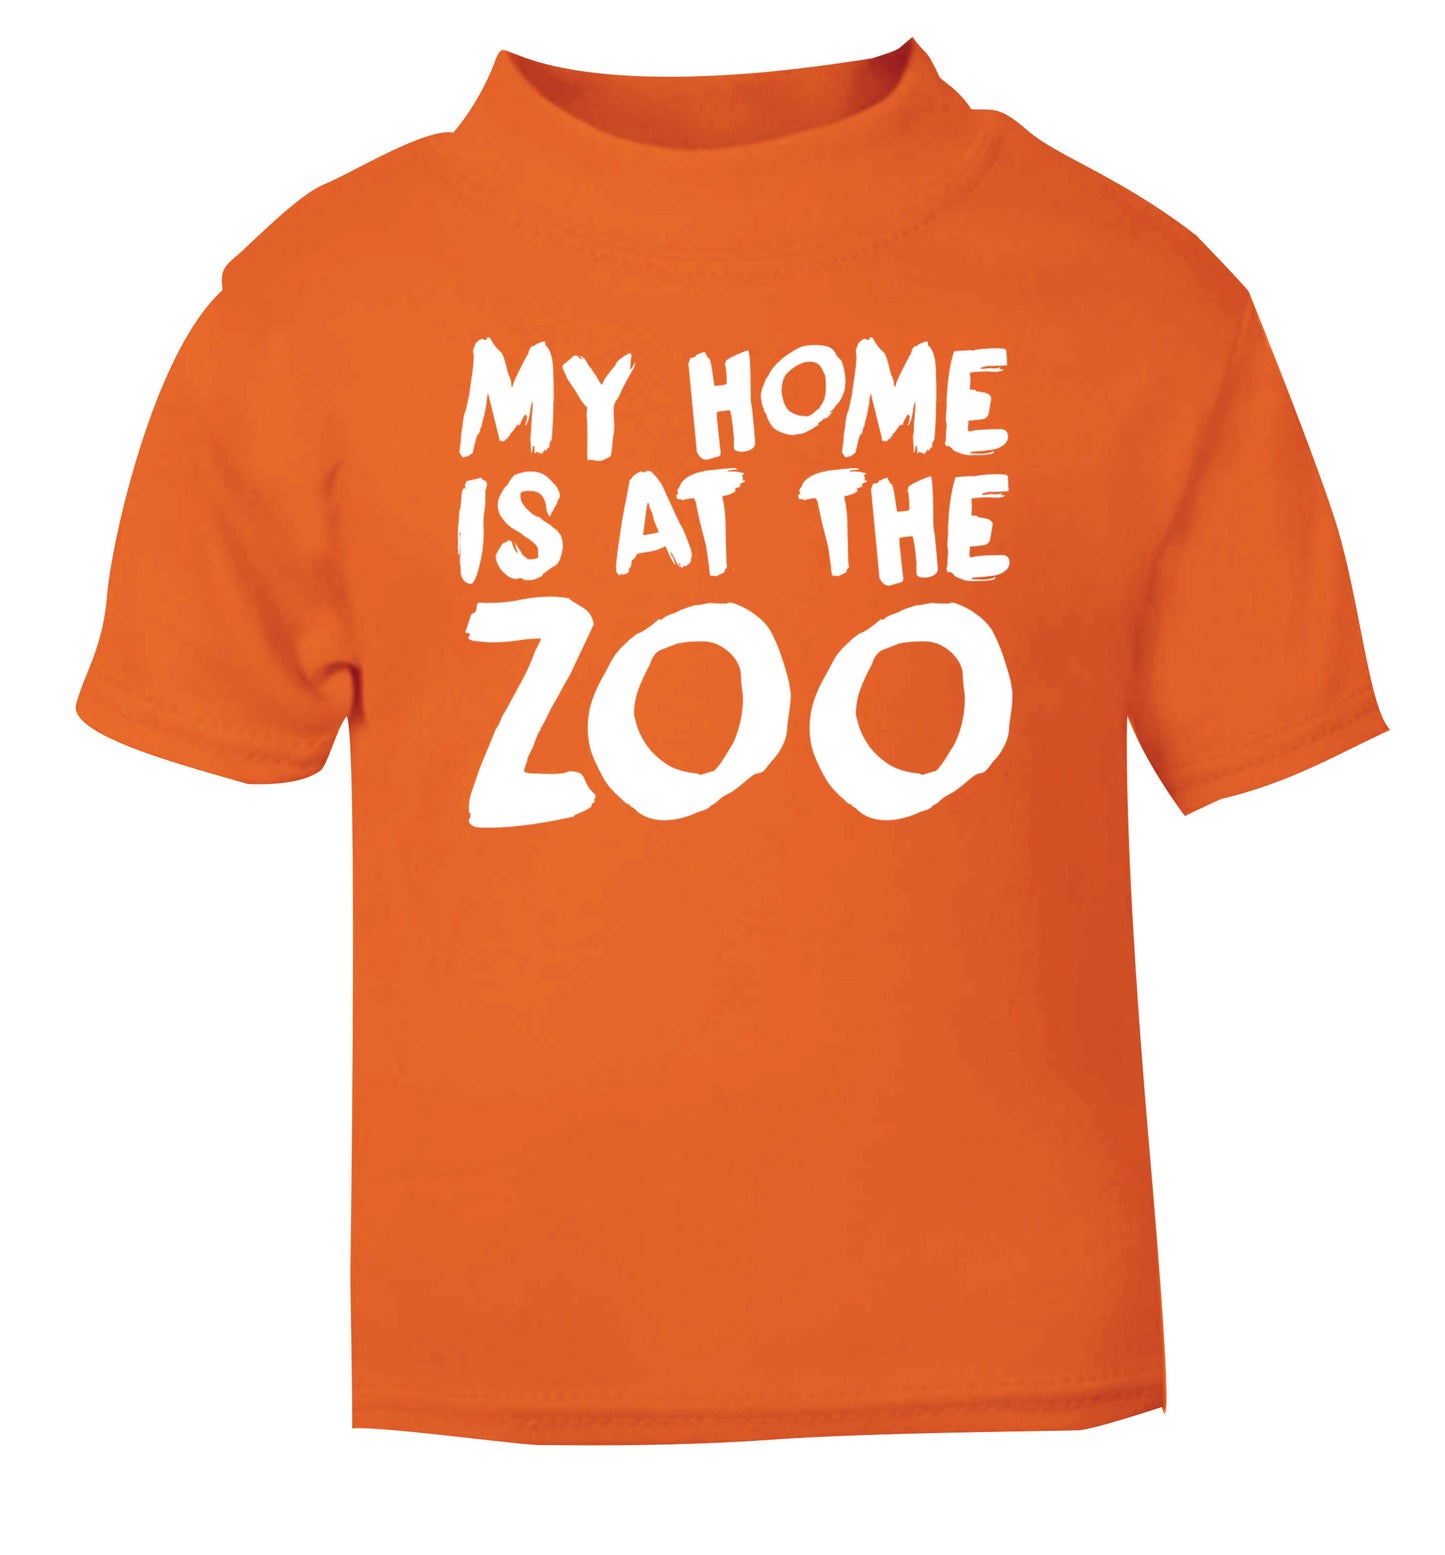 My home is at the zoo orange Baby Toddler Tshirt 2 Years